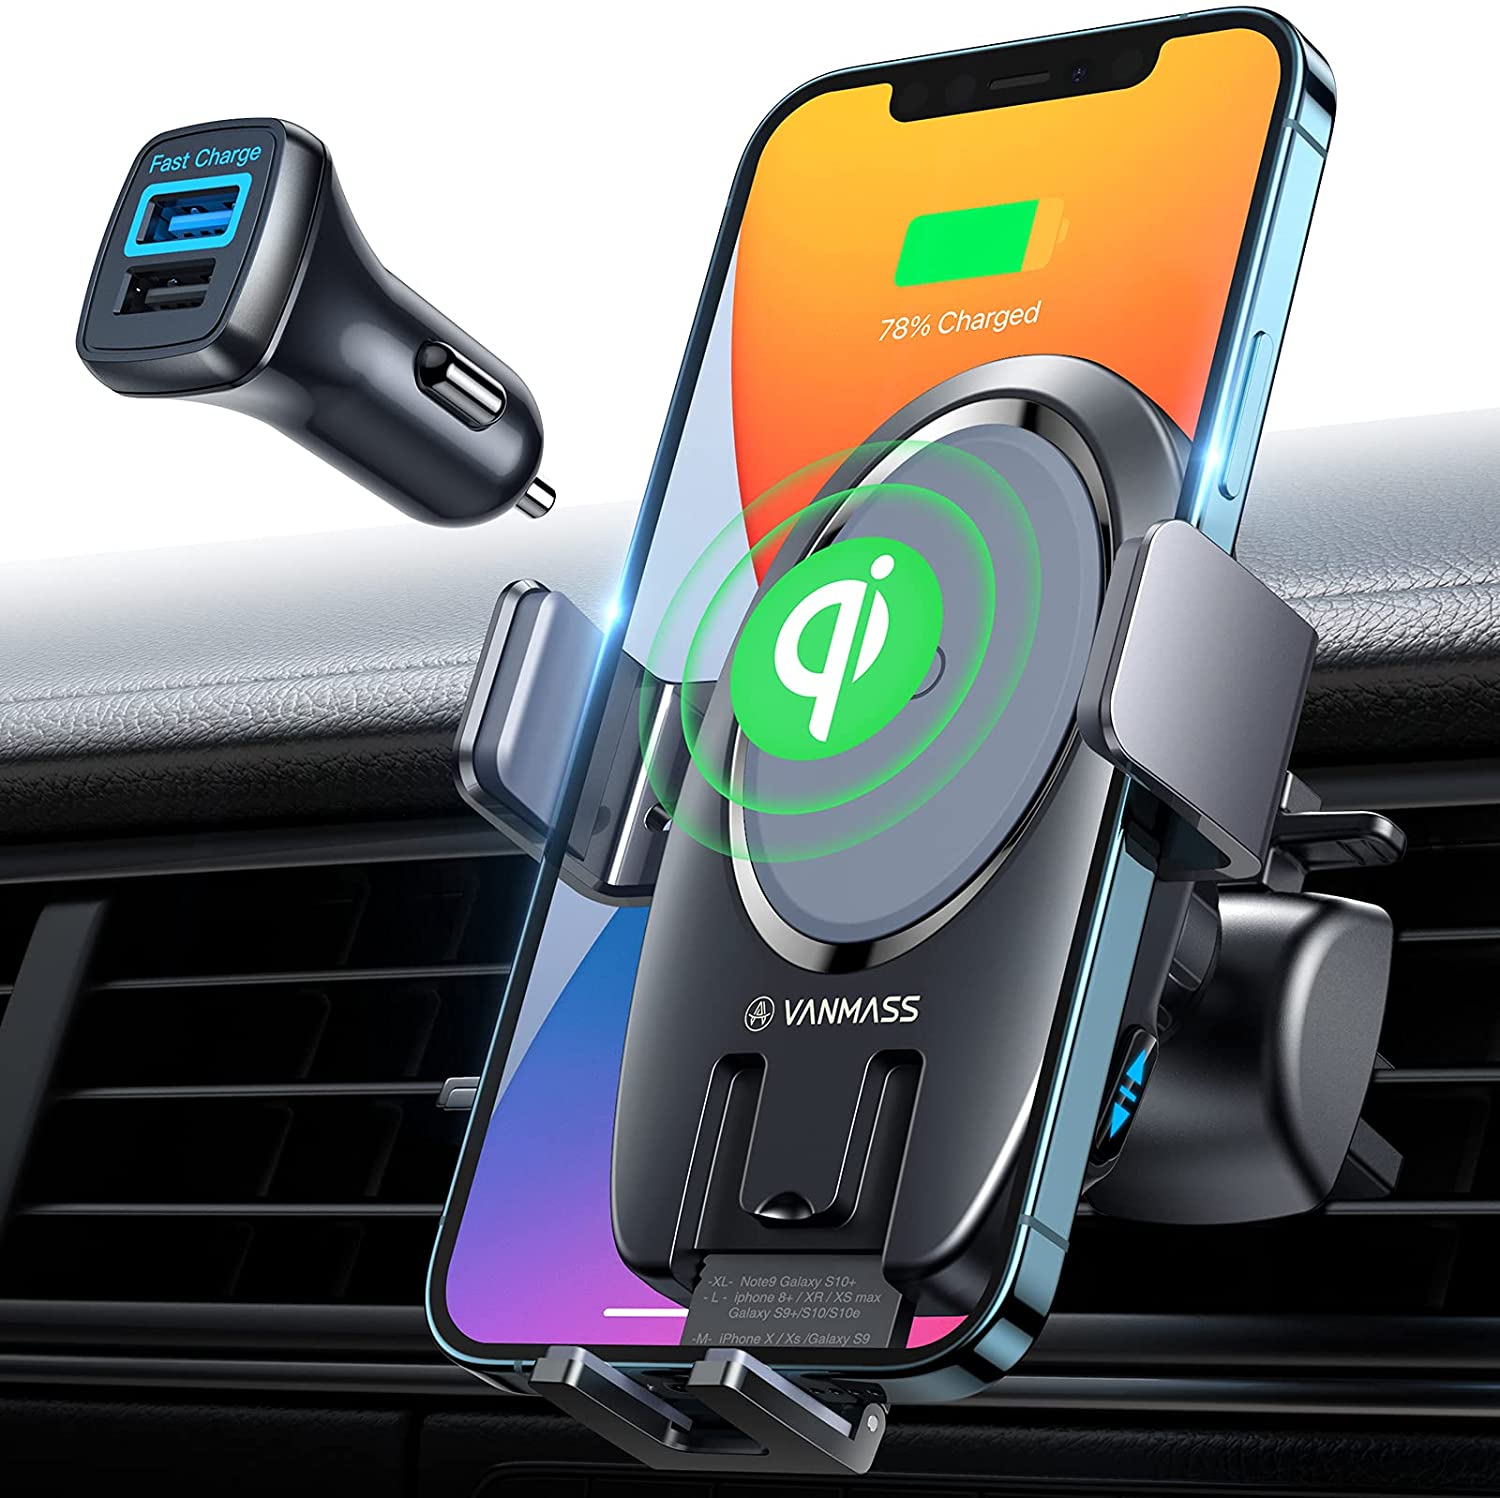 Qi 15W Fast Wireless Car Charger in Car Wireless Charging Automatic Sensor Phone Holder Air Vent and Dashboard Mount Compatible for S20/S10,iPhone 12 Pro Max Mini 11 Pro X XS XR 